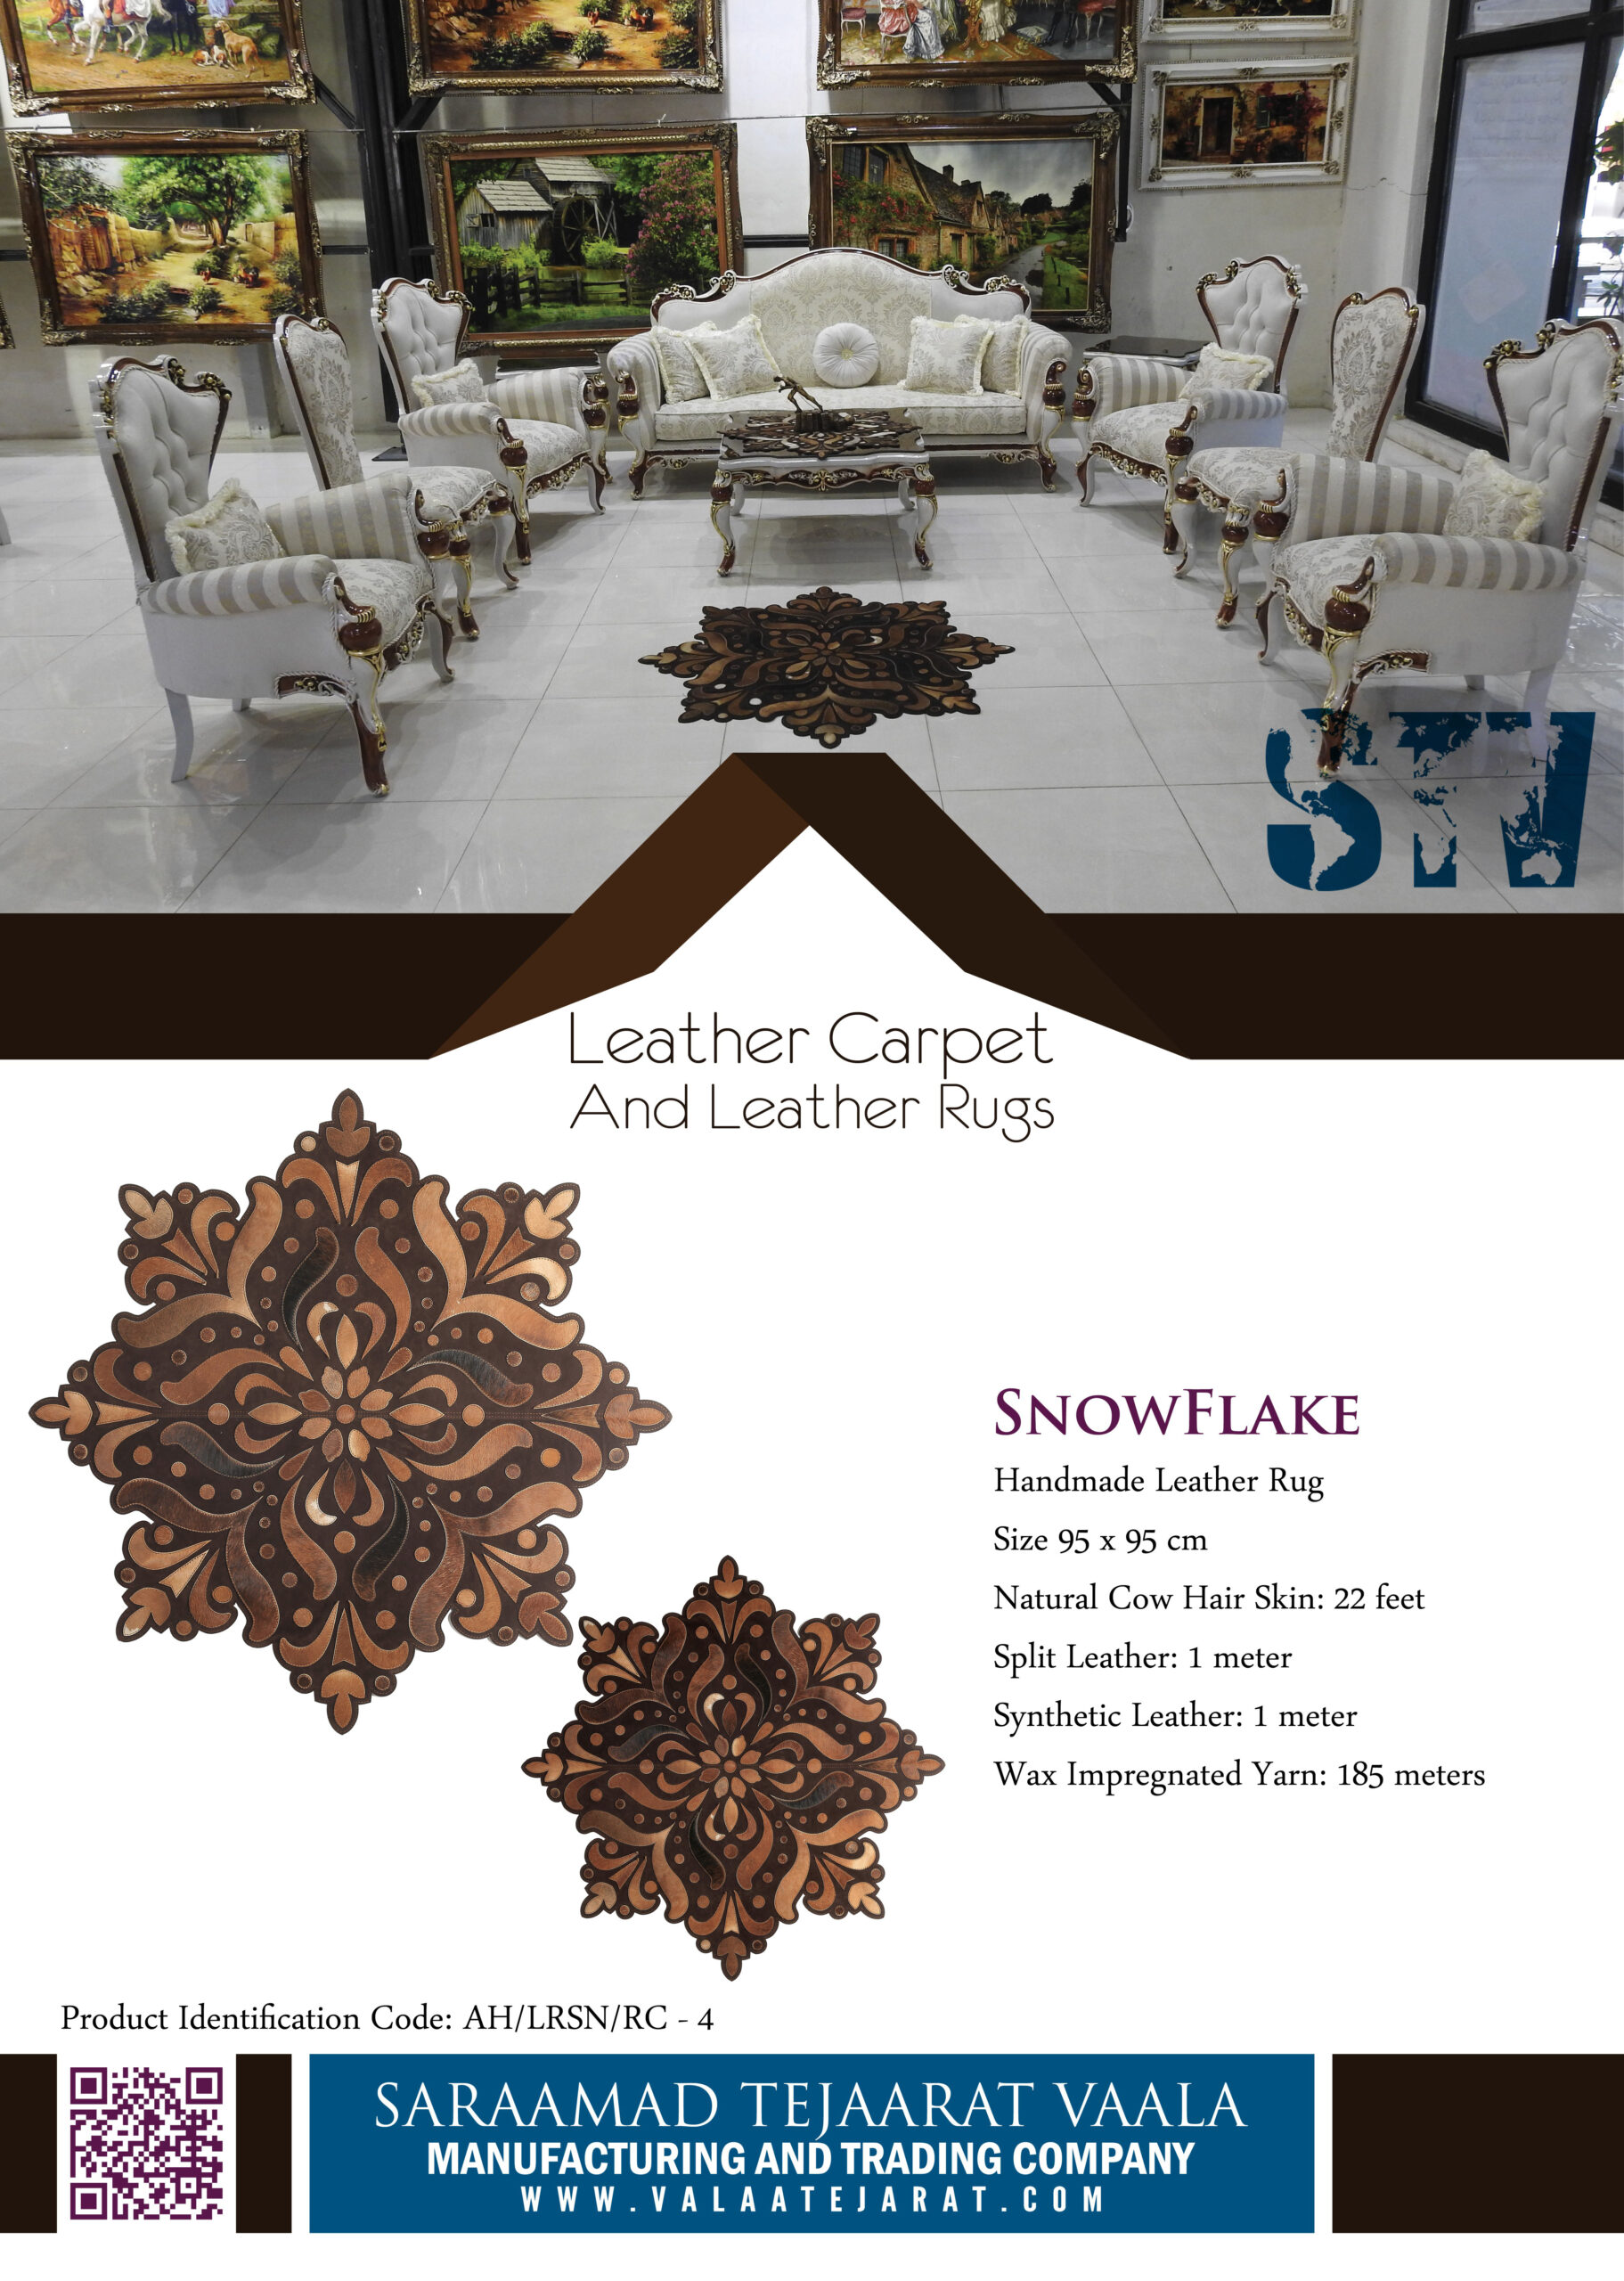 Leather Rugs and Leather Carpets